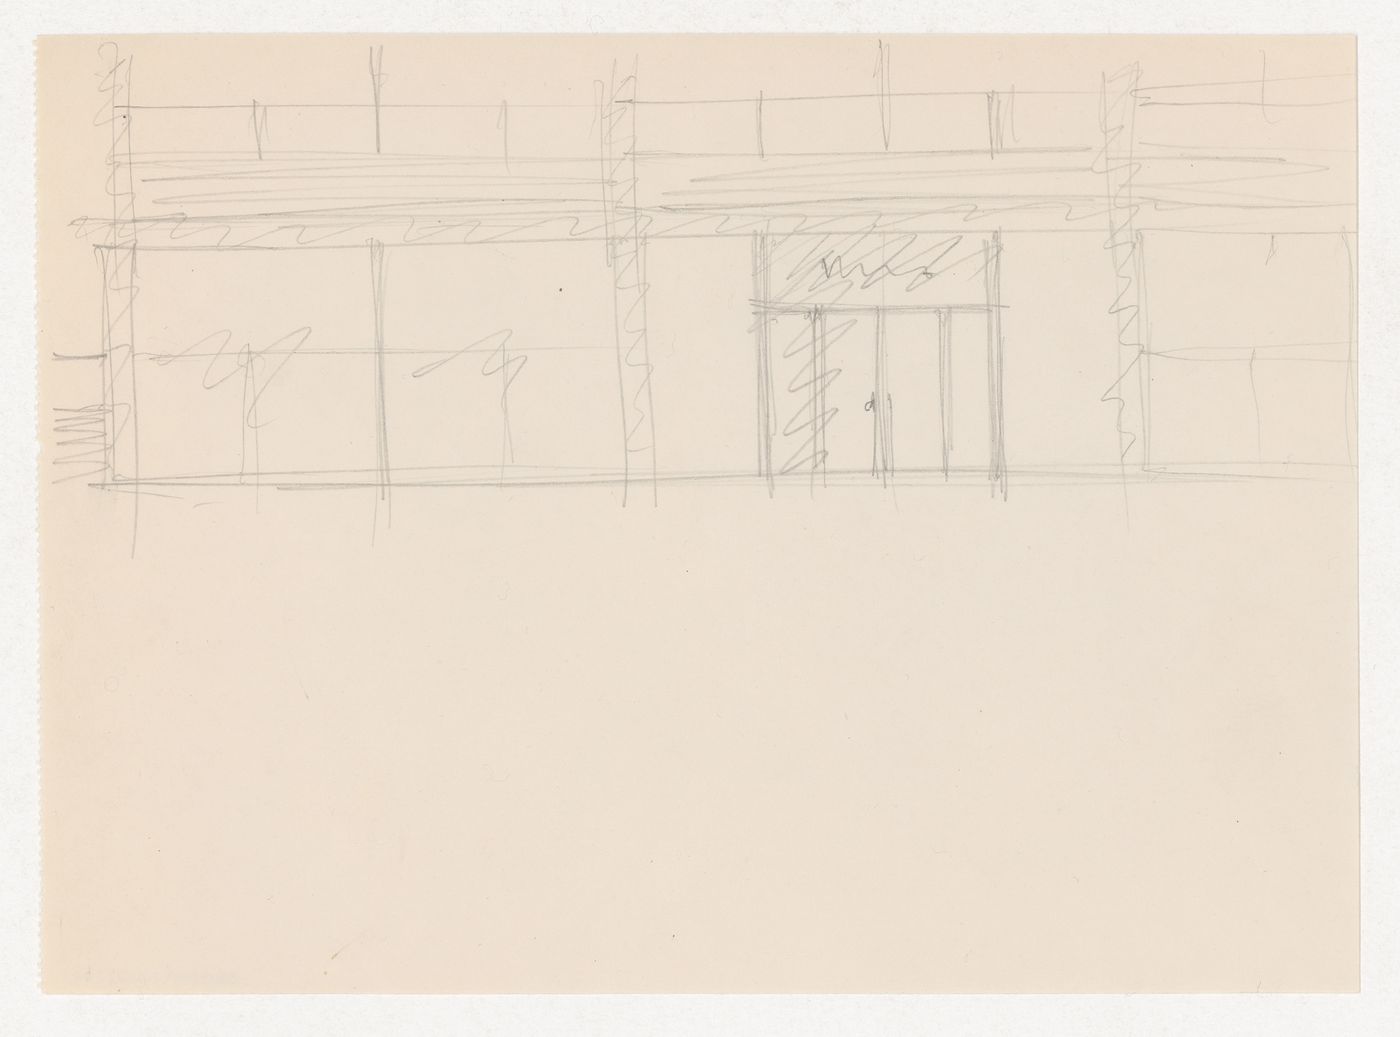 Partial sketch elevation for the Metallurgy Building, Illinois Institute of Technology, Chicago